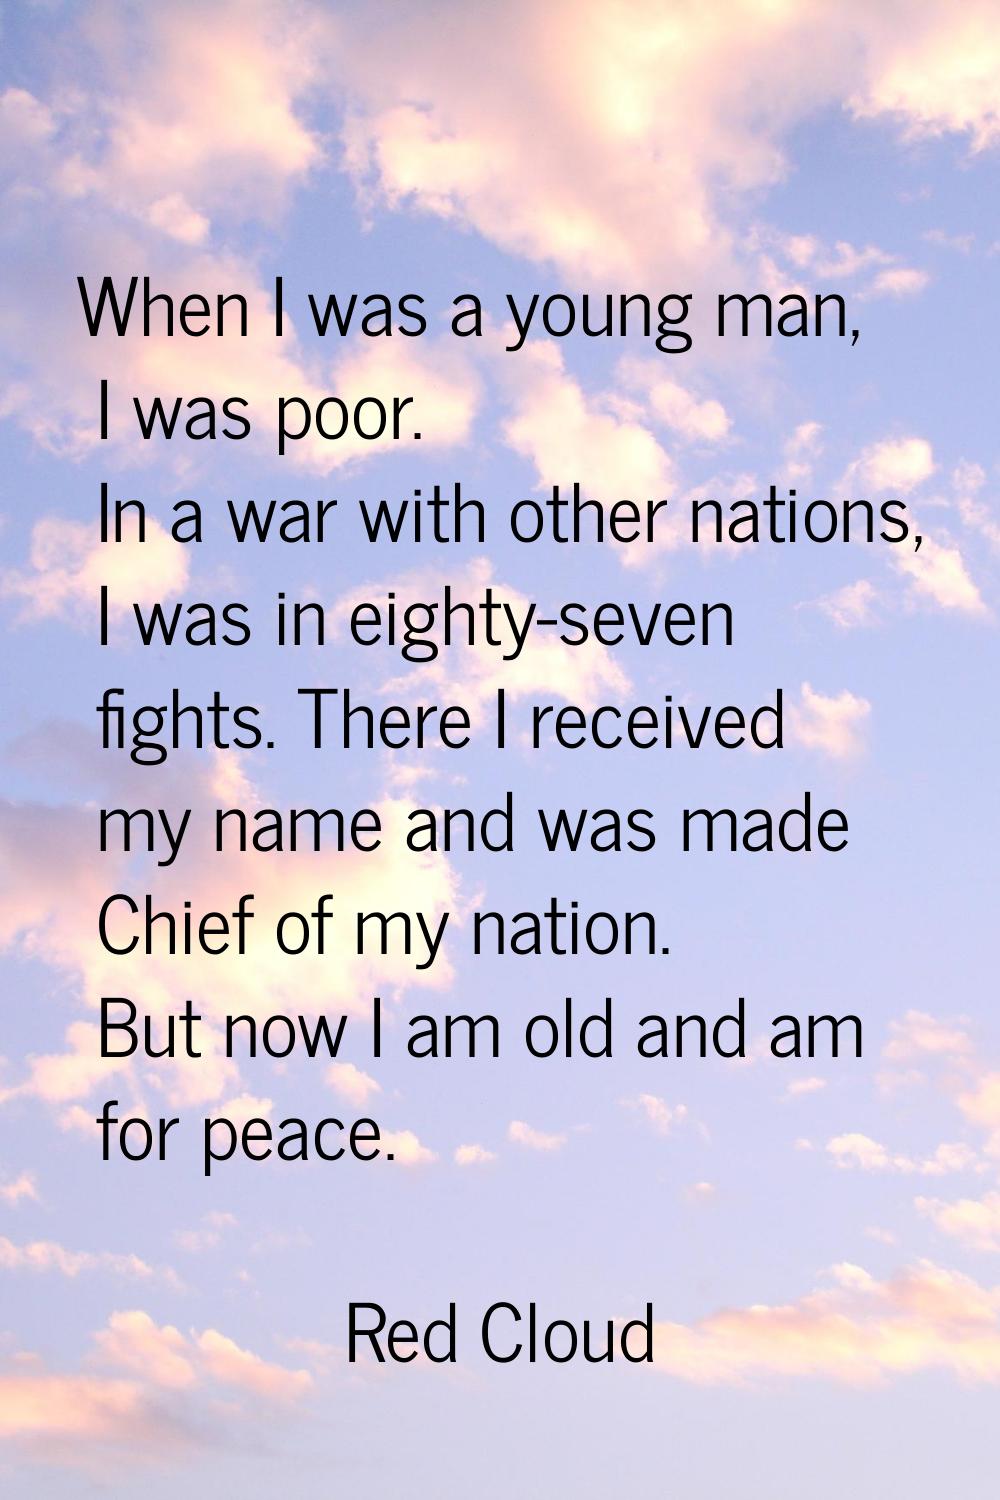 When I was a young man, I was poor. In a war with other nations, I was in eighty-seven fights. Ther